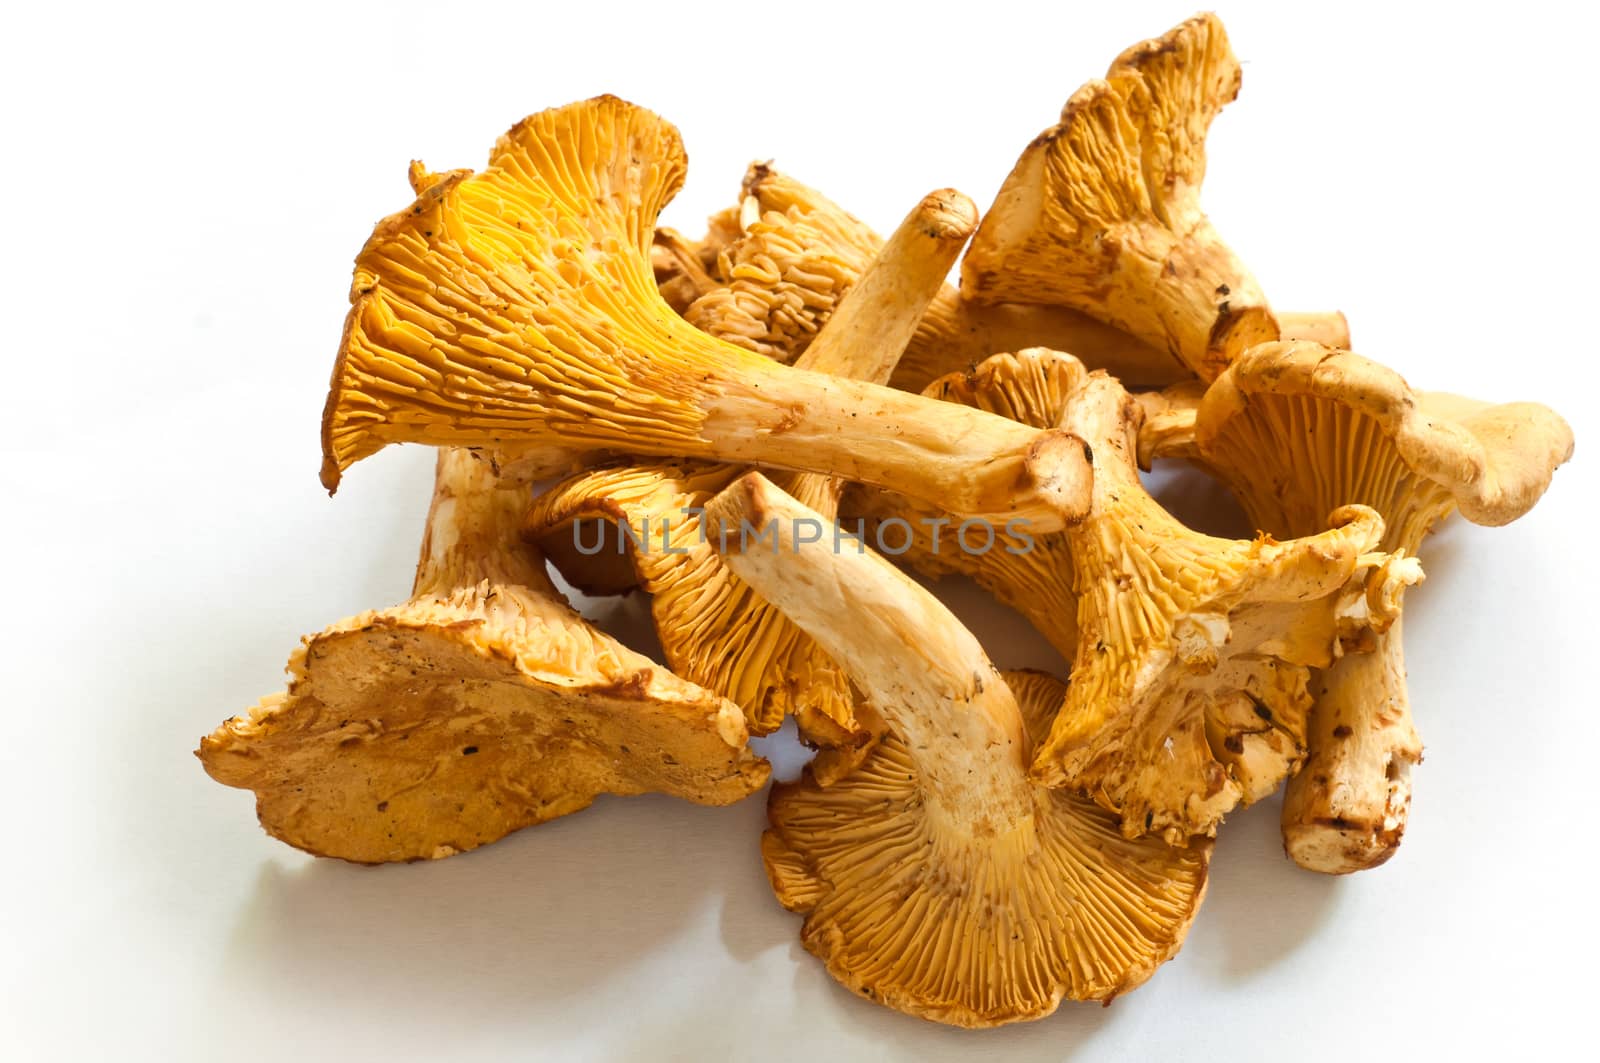 Group of fresh chanterelles on the white background.  by NeydtStock